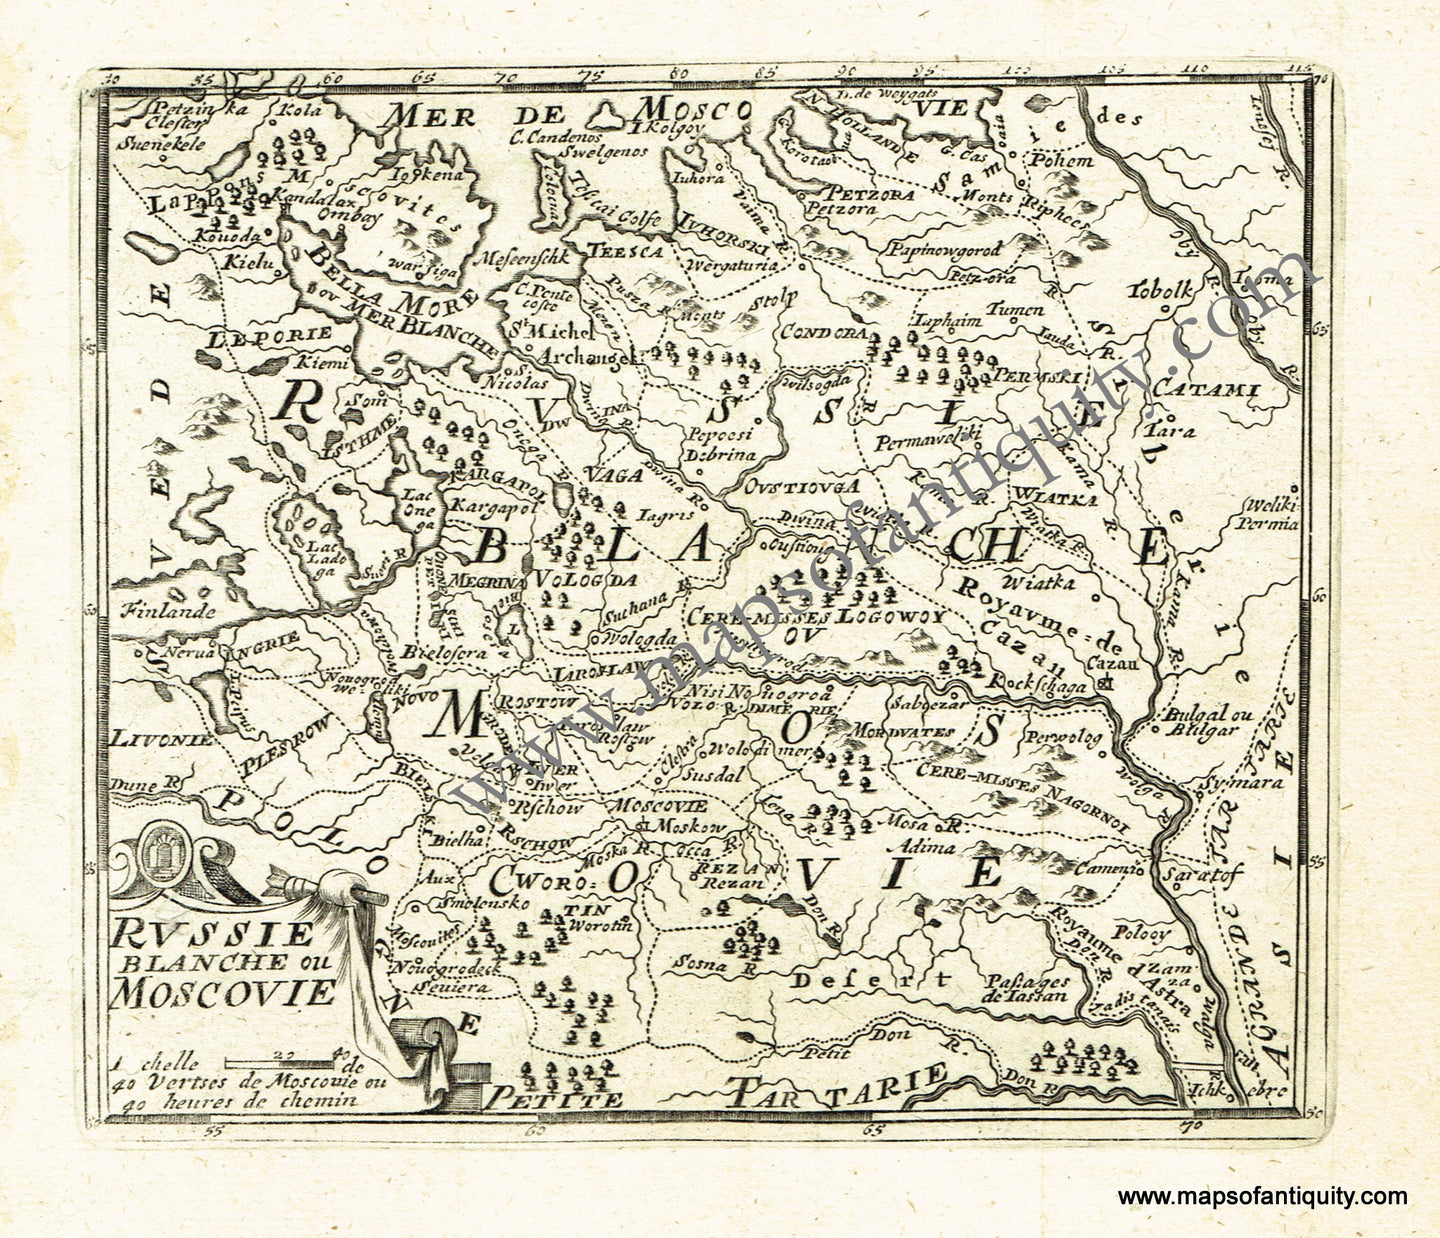 Antique-Black-and-White-Map-Russie-Blanche-ou-Moscovie-(North-eastern-Russia)-Europe-Russia-1725-De-Aefferden-Maps-Of-Antiquity